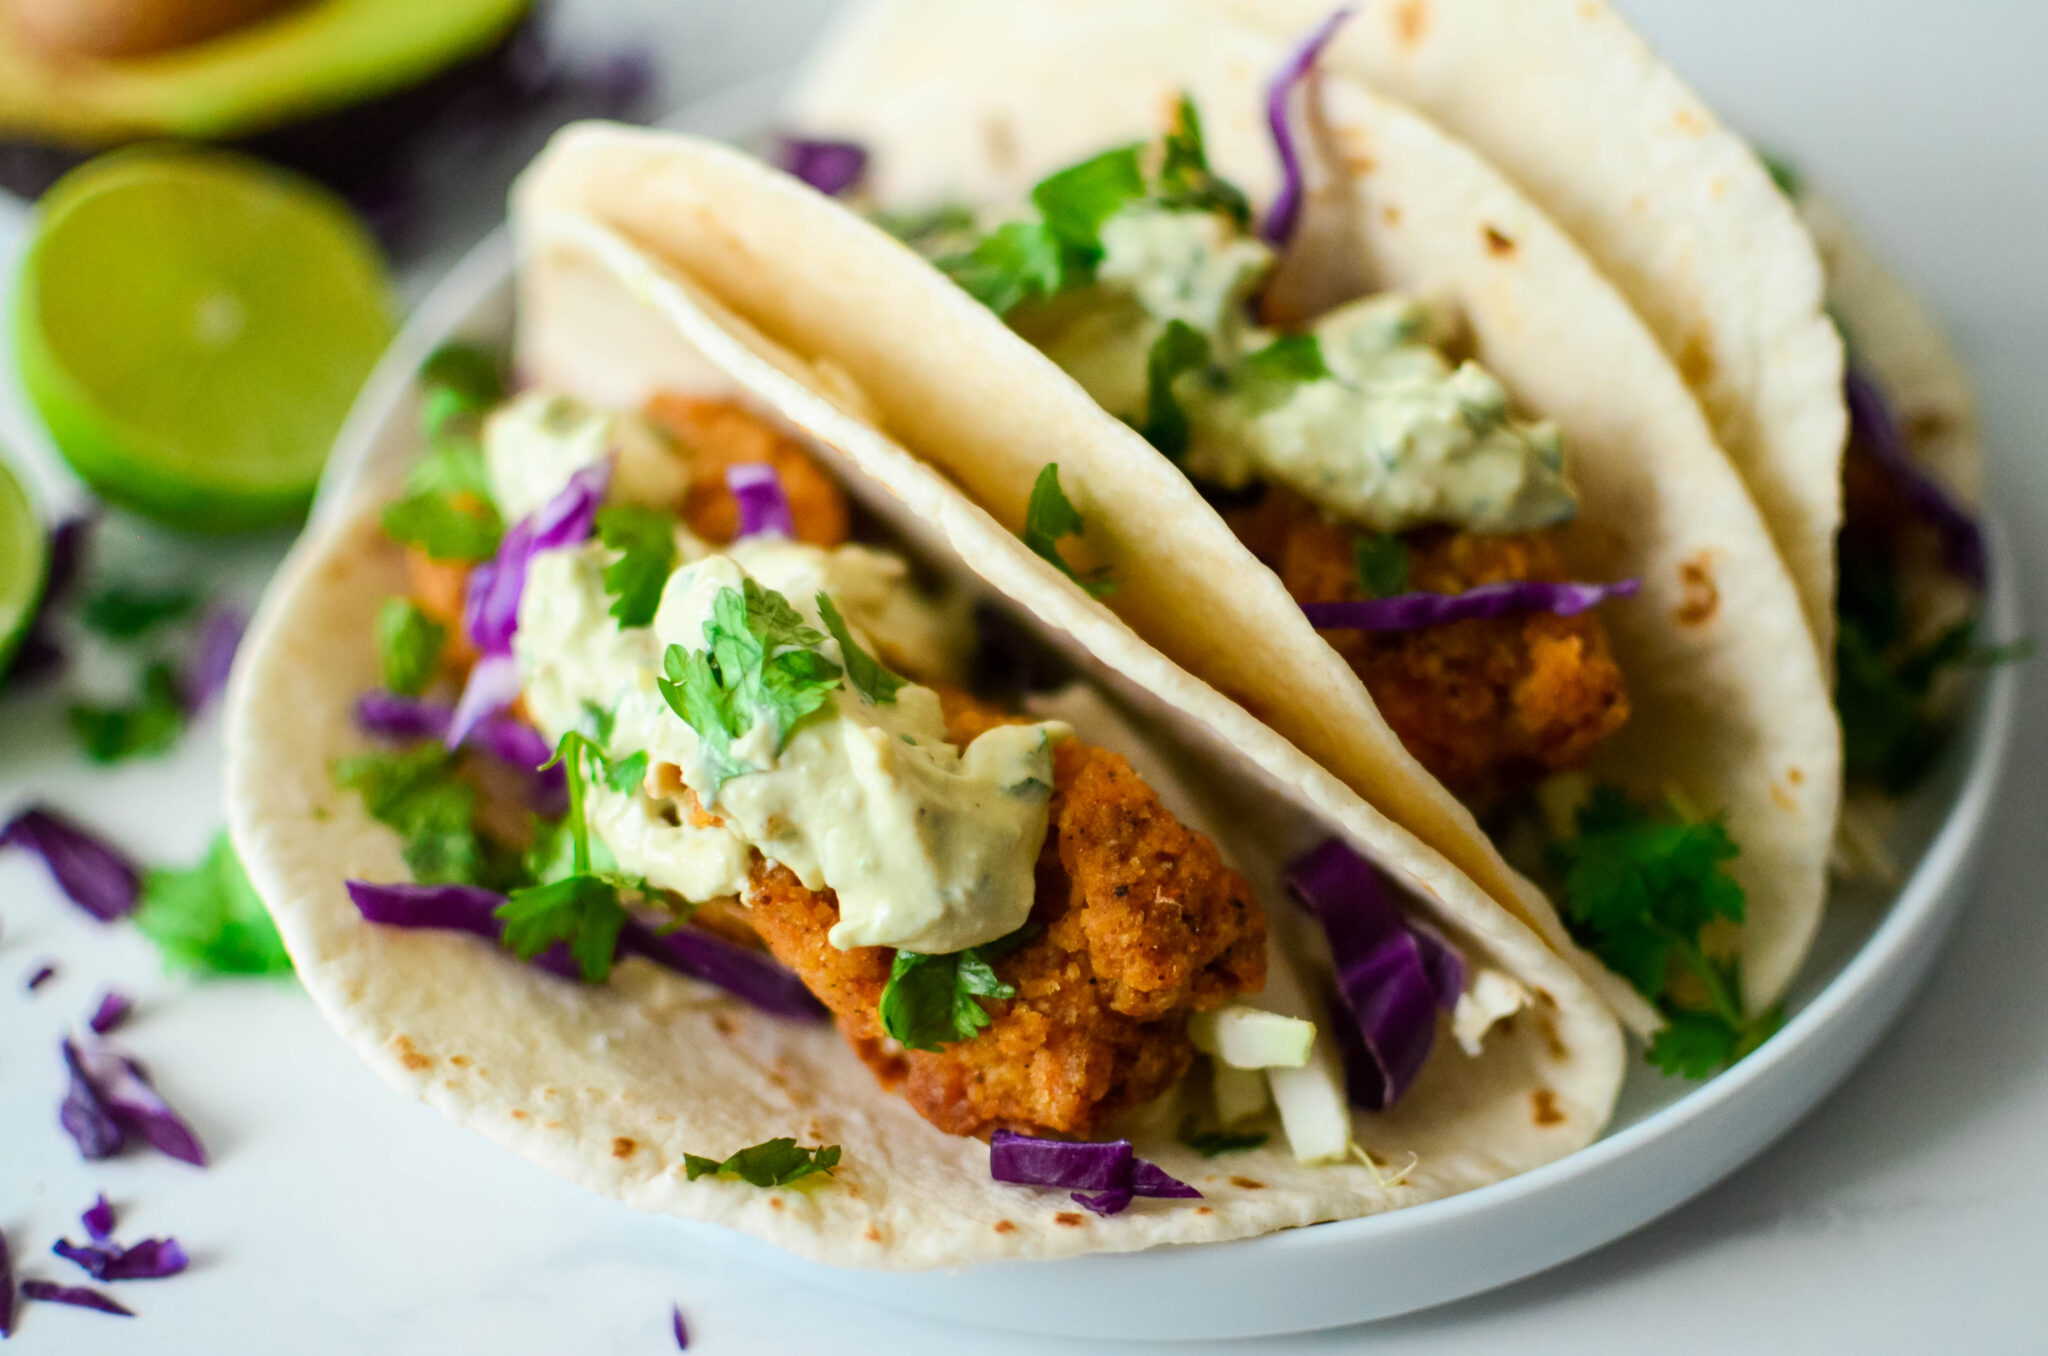 Crispy Oven-Fried Fish Tacos with Avocado Lime Crema – Forks and Straws